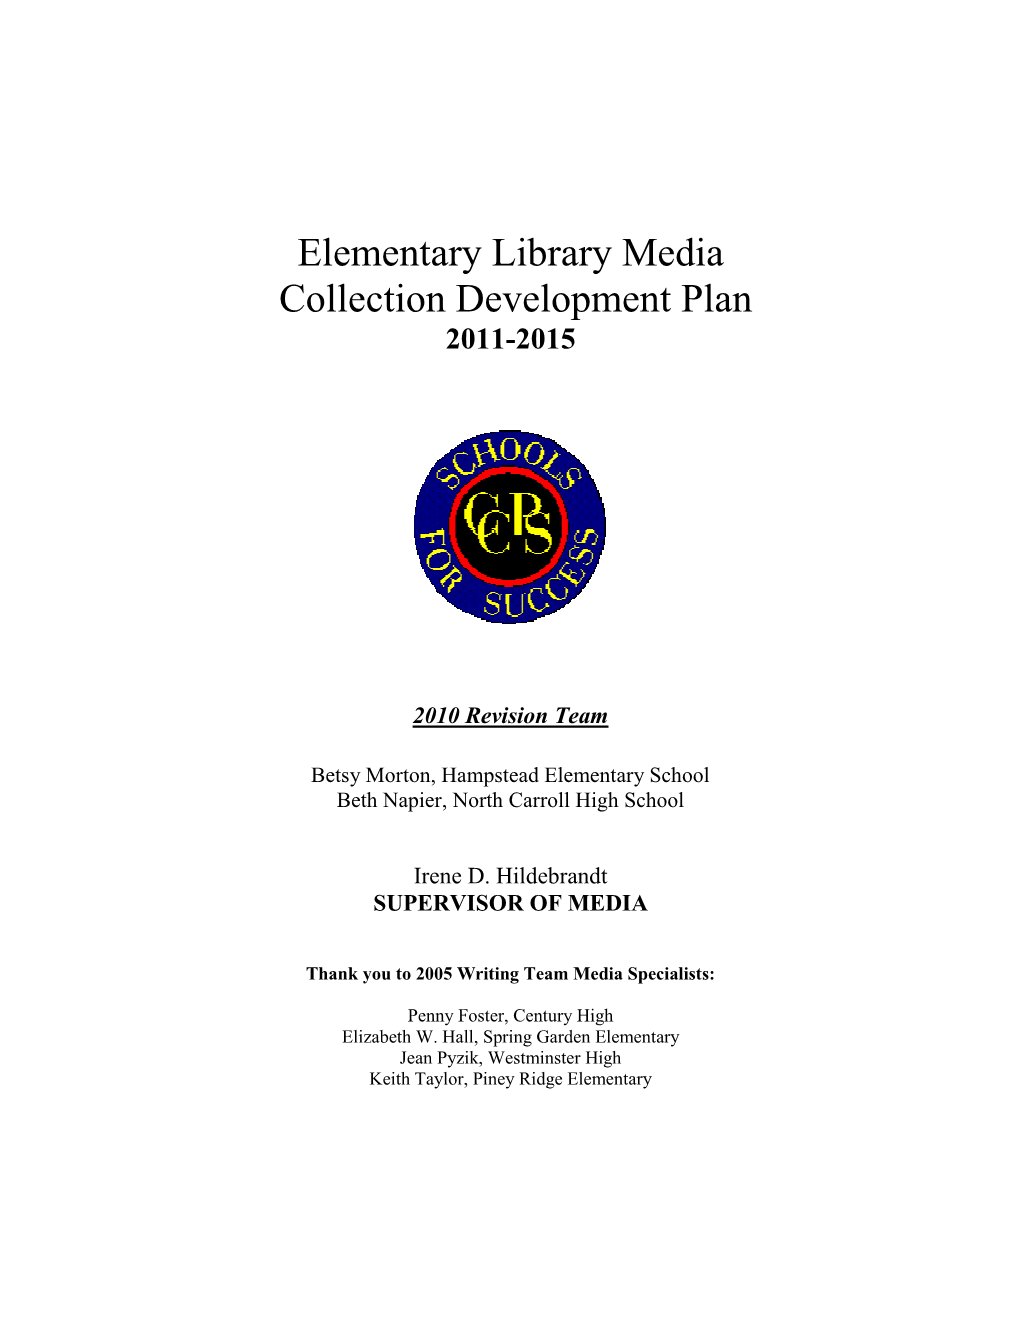 Elementary Library Media Collection Development Plan 2011-2015